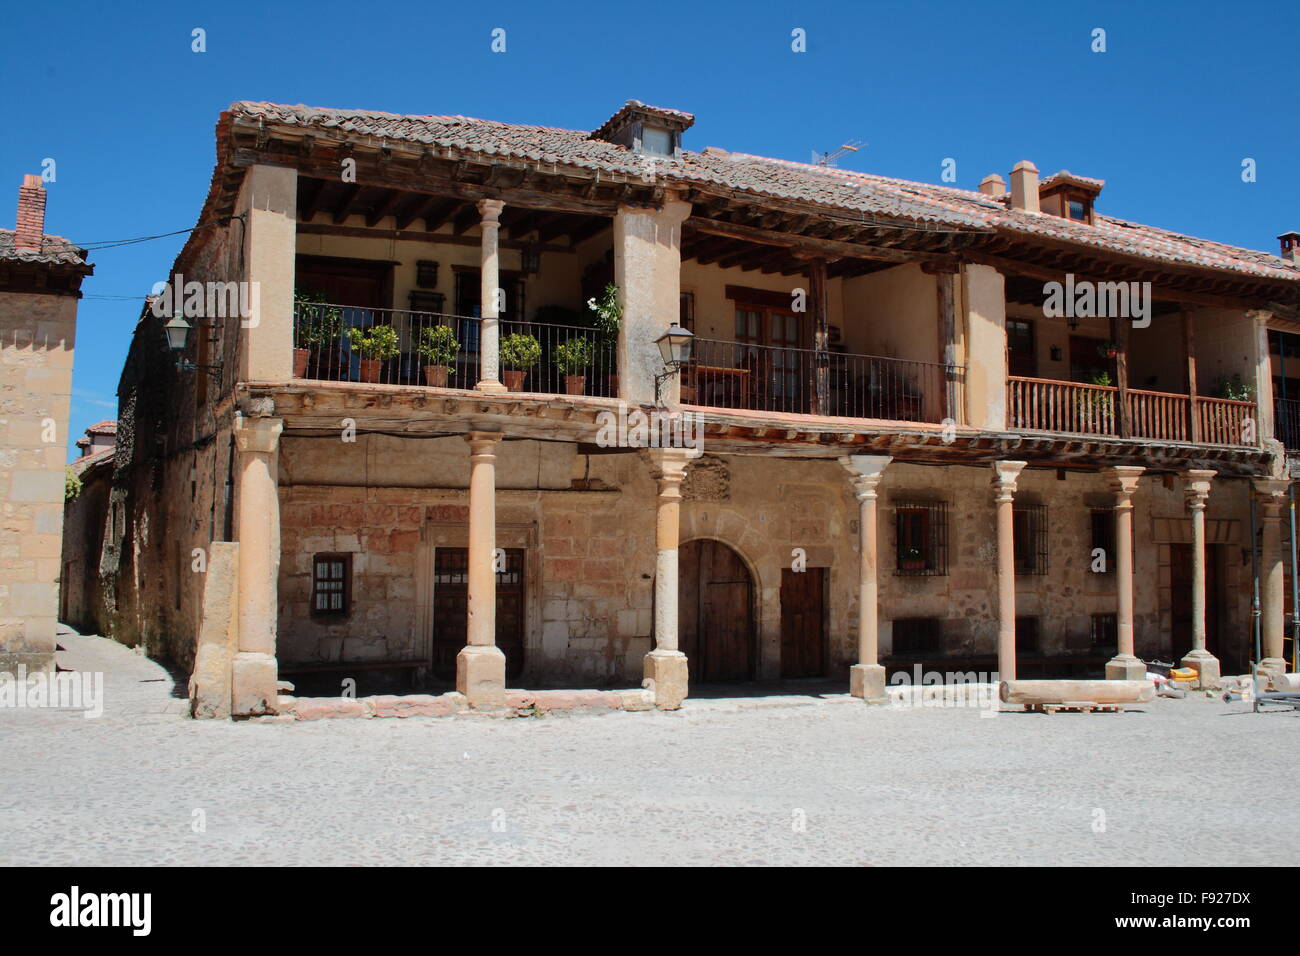 Old medieval buildings of Pedraza. Stock Photo